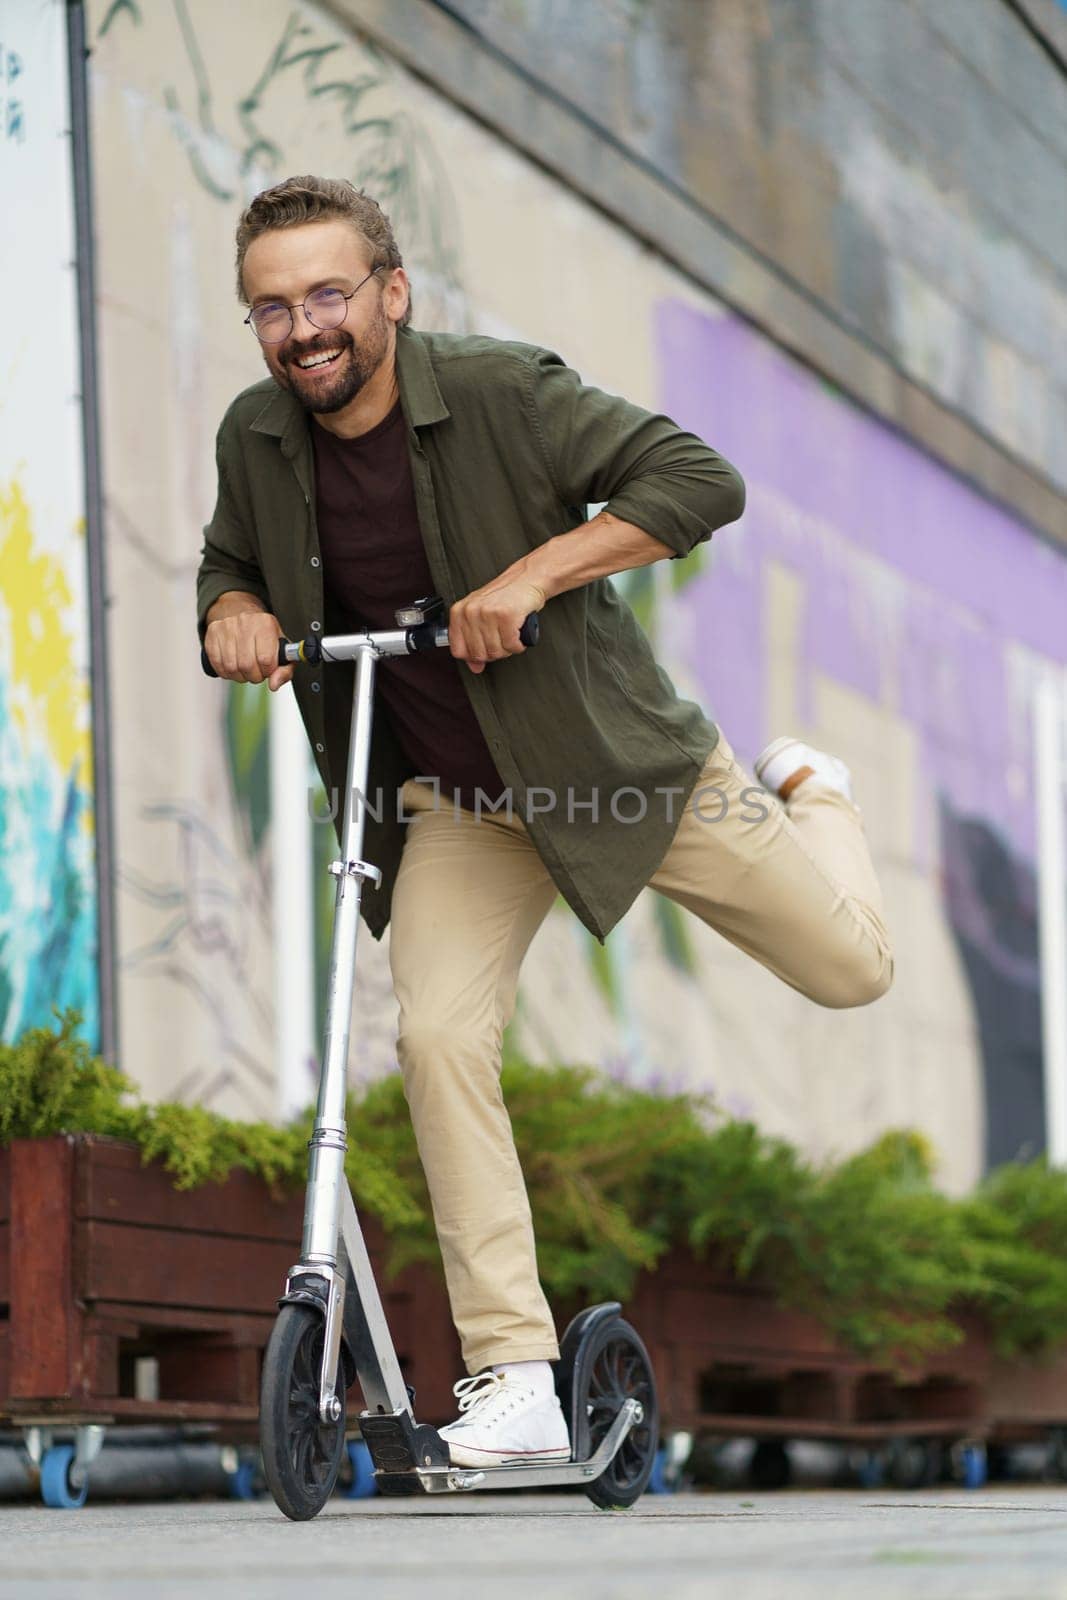 Fun and happy life as a smiling man rides a scooter on the street. With a beaming smile and an expression of pure joy, he embraces the sense of freedom and adventure that comes with scooter riding. High quality photo